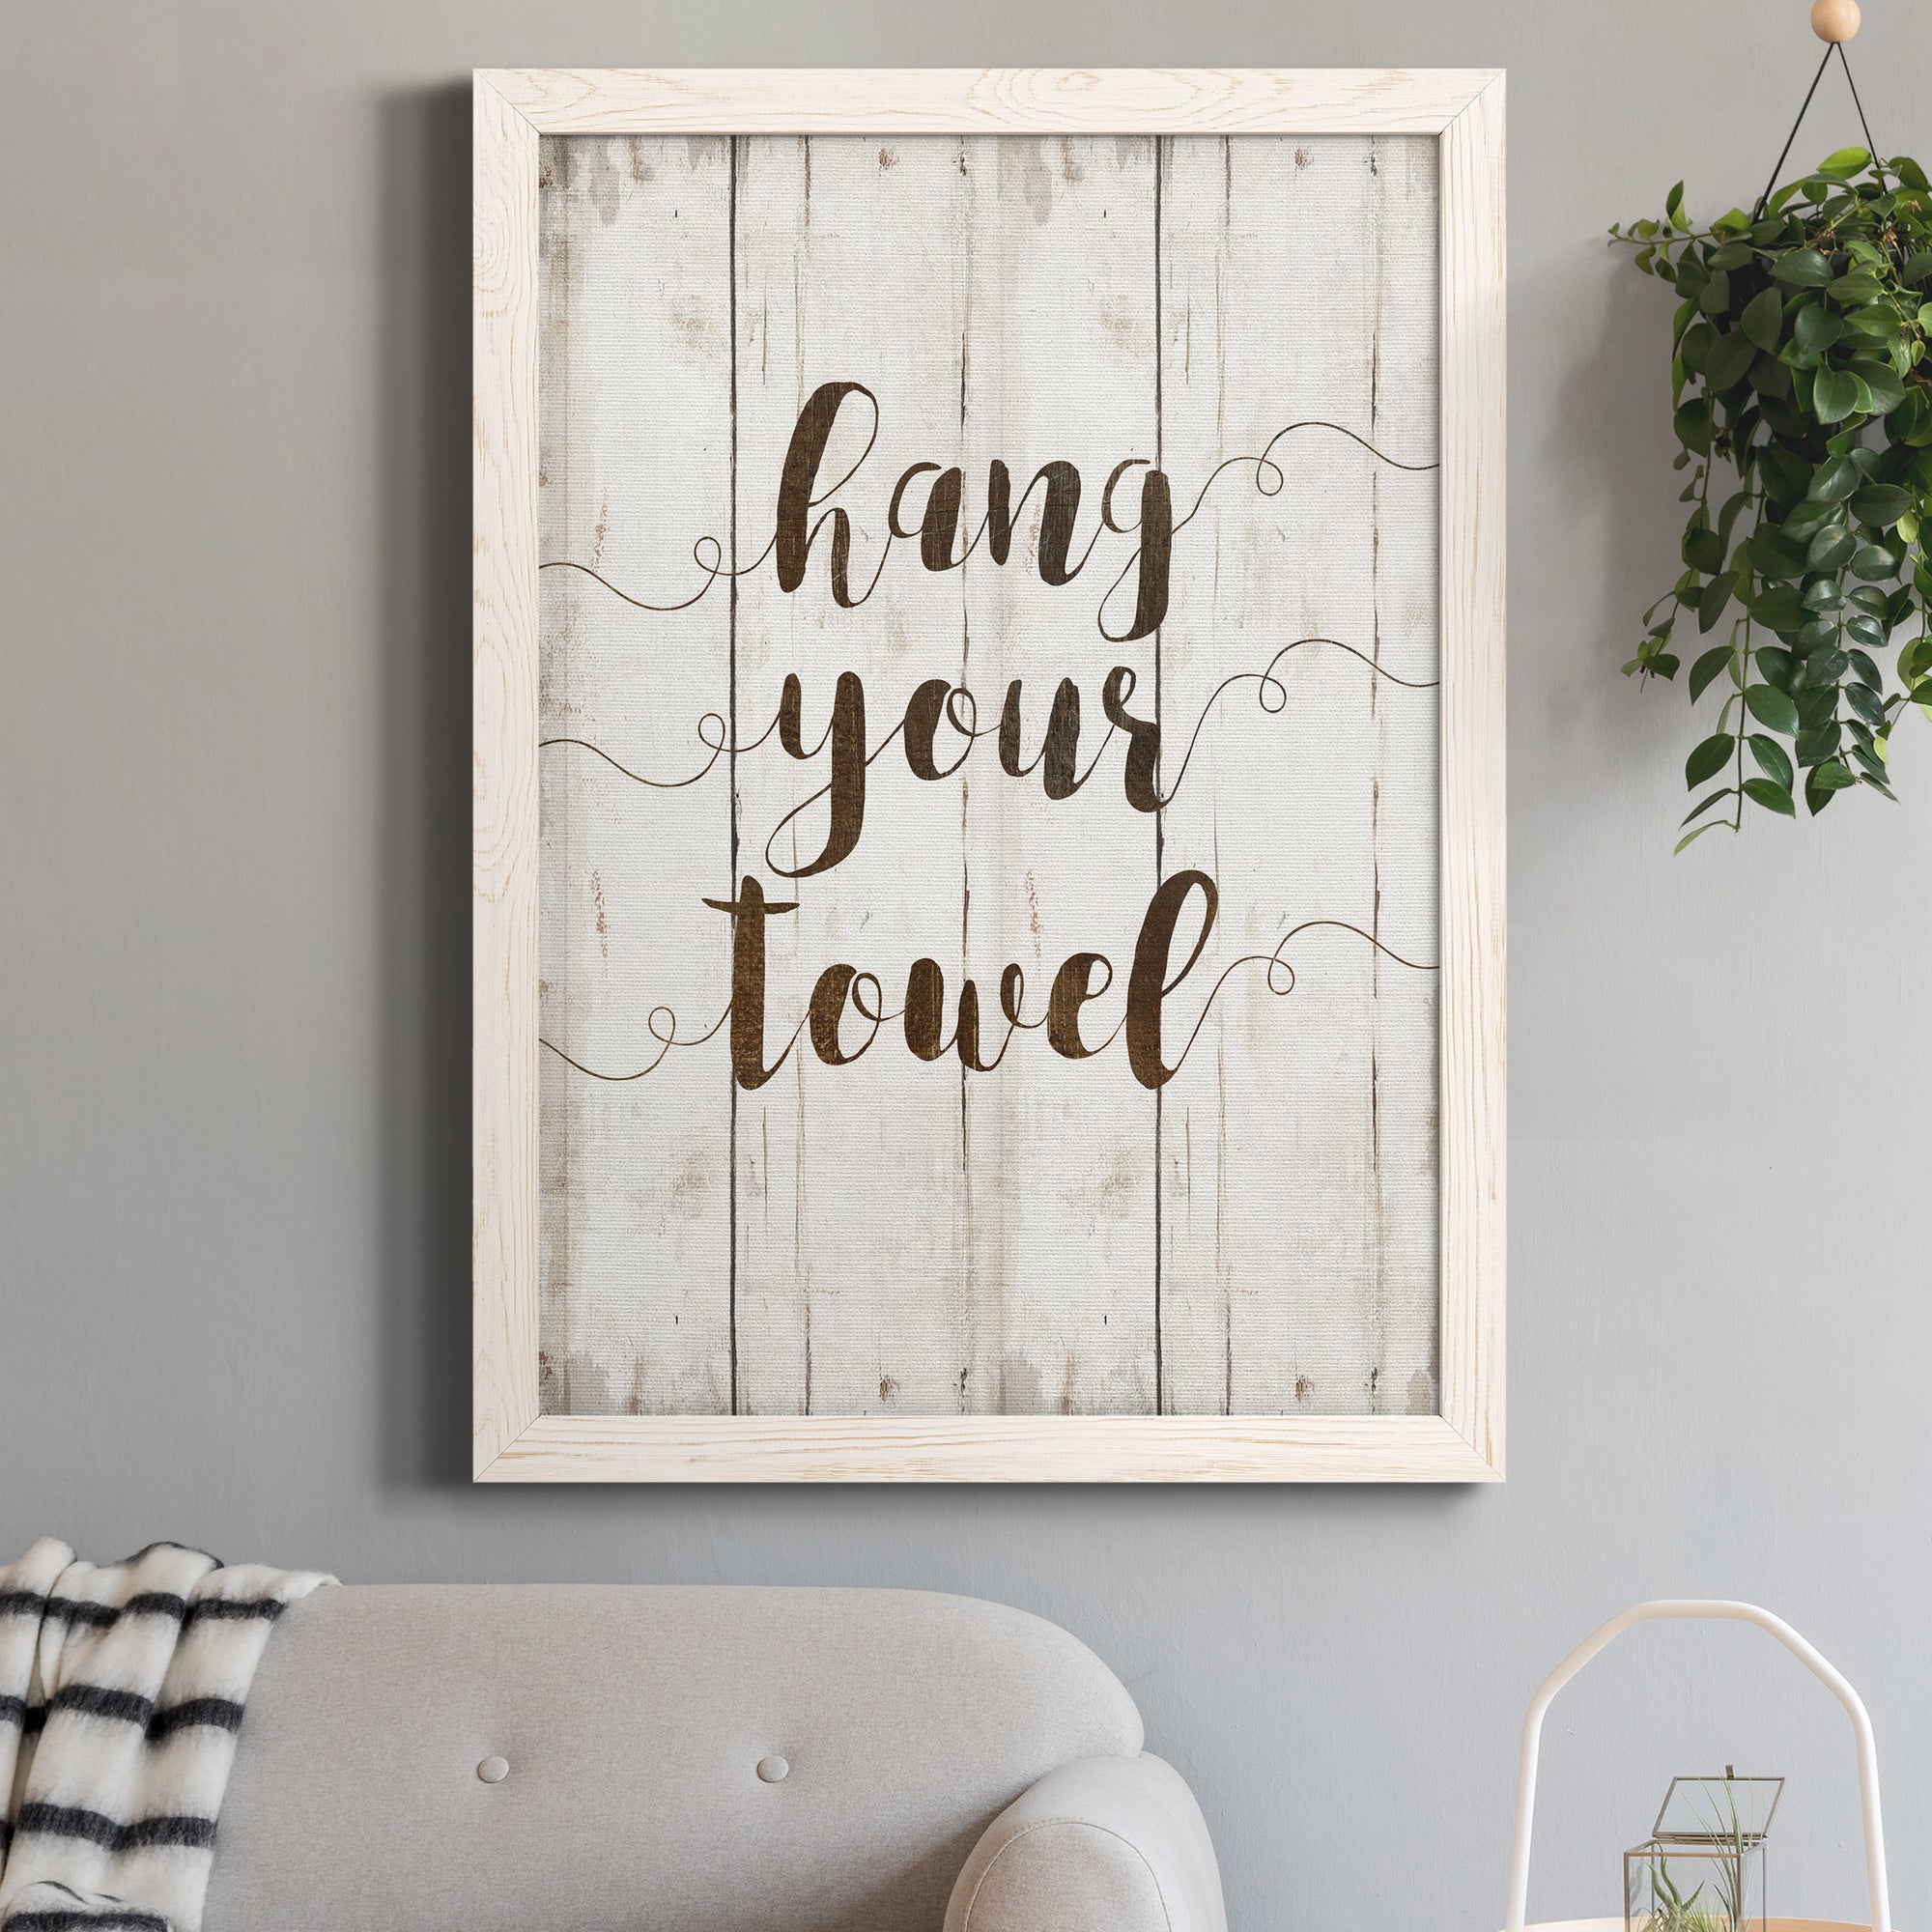 Hang Your Towel - Premium Canvas Framed in Barnwood - Ready to Hang